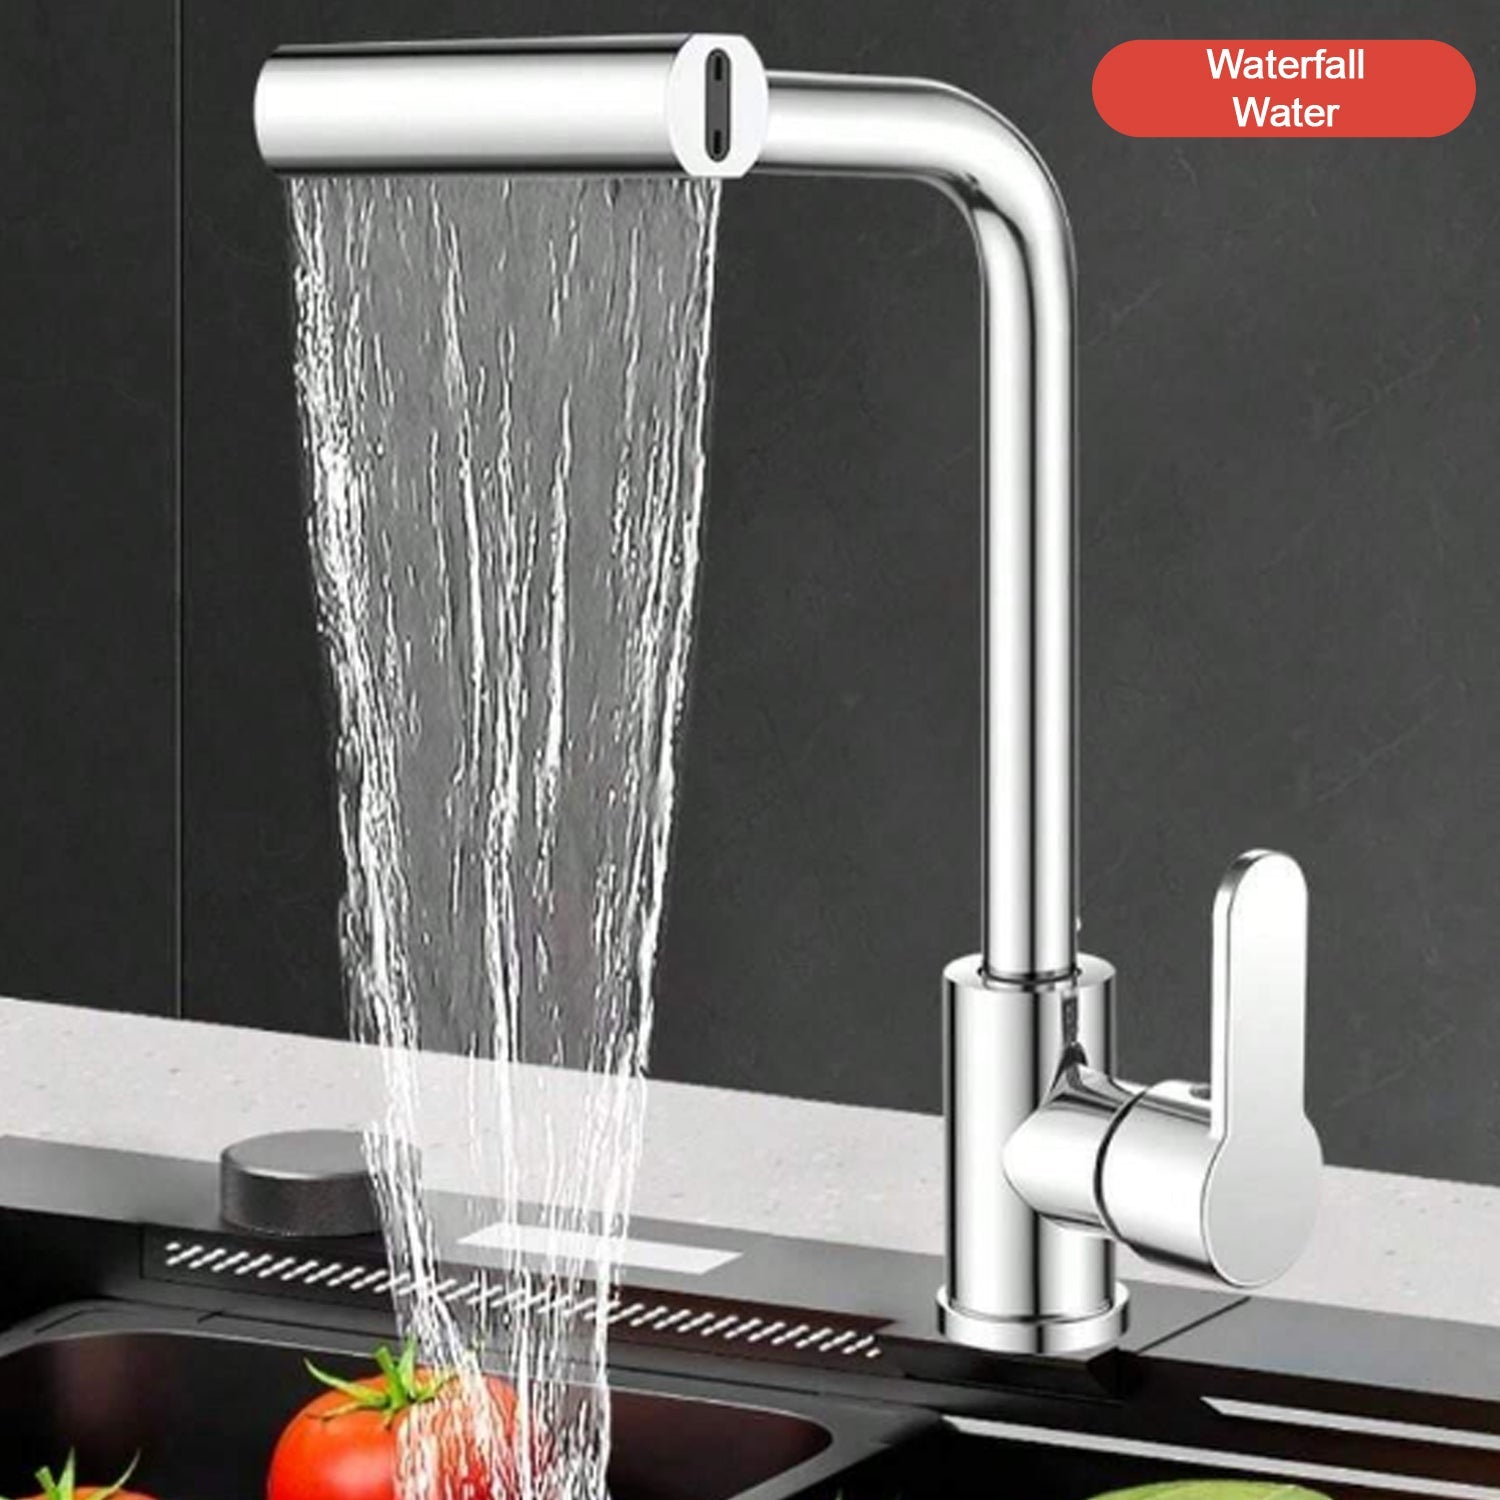 7575 Multifunction Shower Waterfall Kitchen Faucet, 360° Rotation Waterfall Kitchen Faucet, Touch Kitchen Faucet, Faucet Extender for Kitchen Sink, Swivel Waterfall Kitchen Faucet for Washing Vegetable Fruit (4 In 1 )